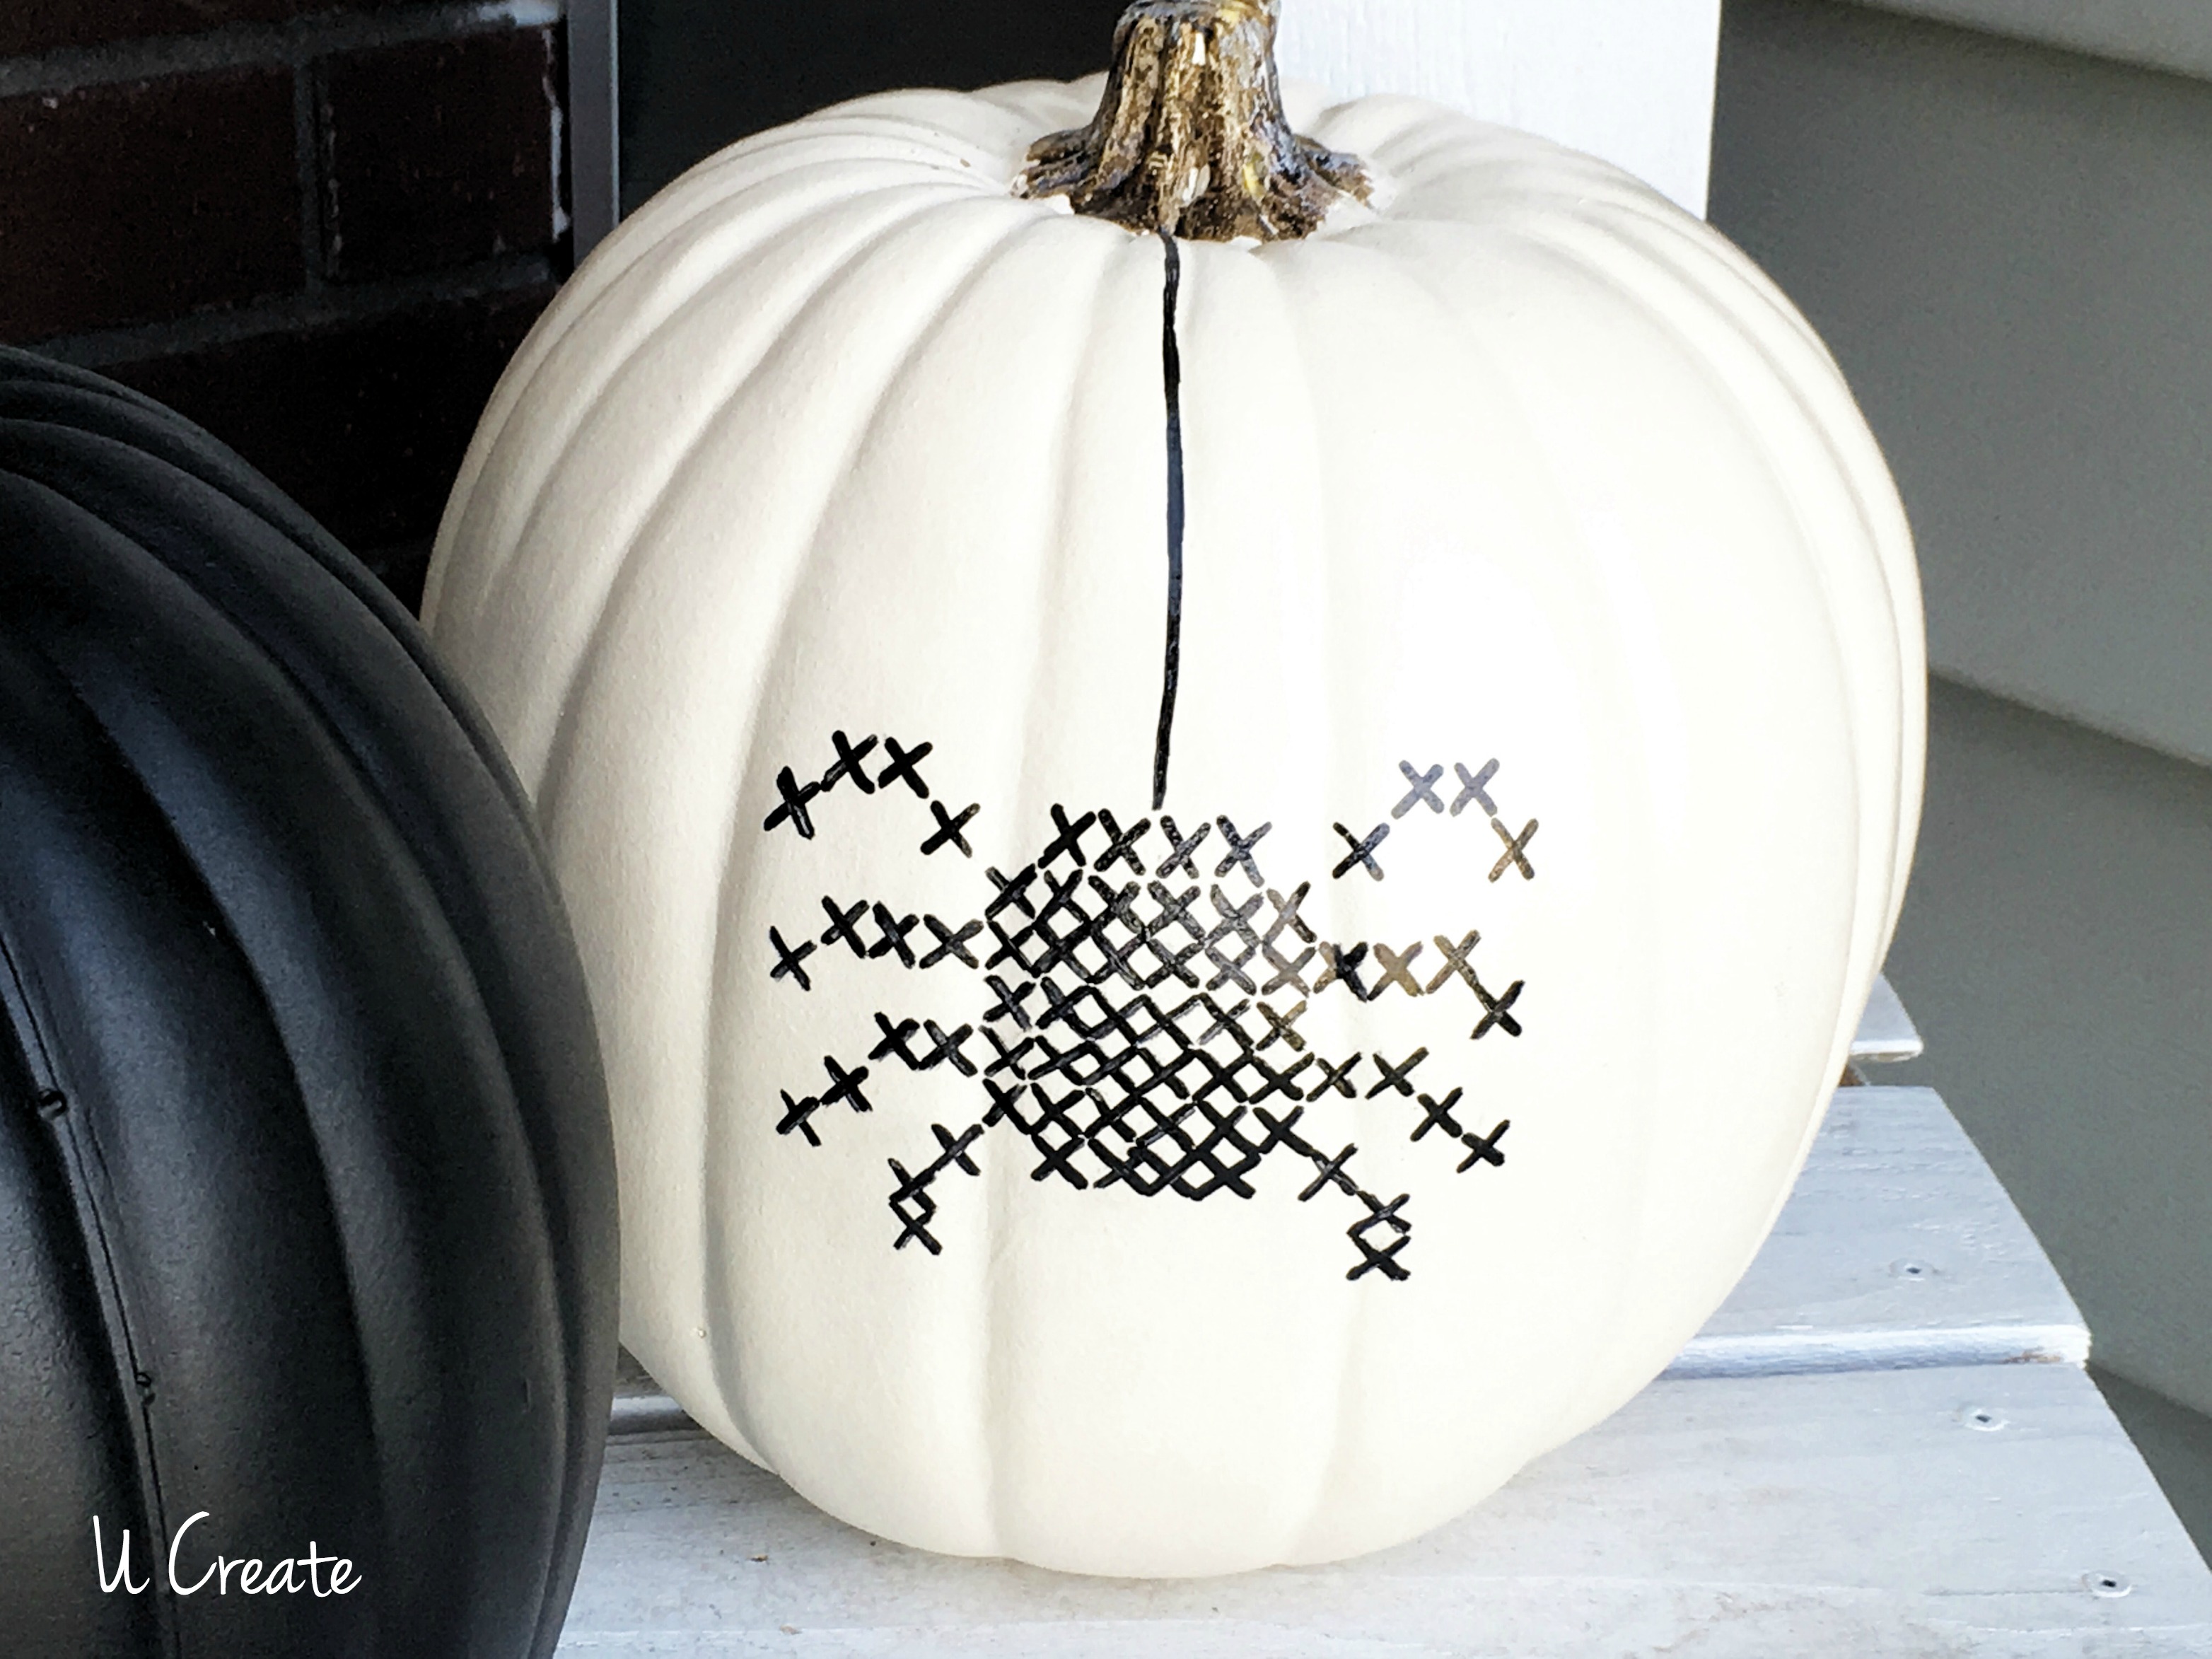 DIY Paint Stitched Pumpkins with free printable templates by U Create